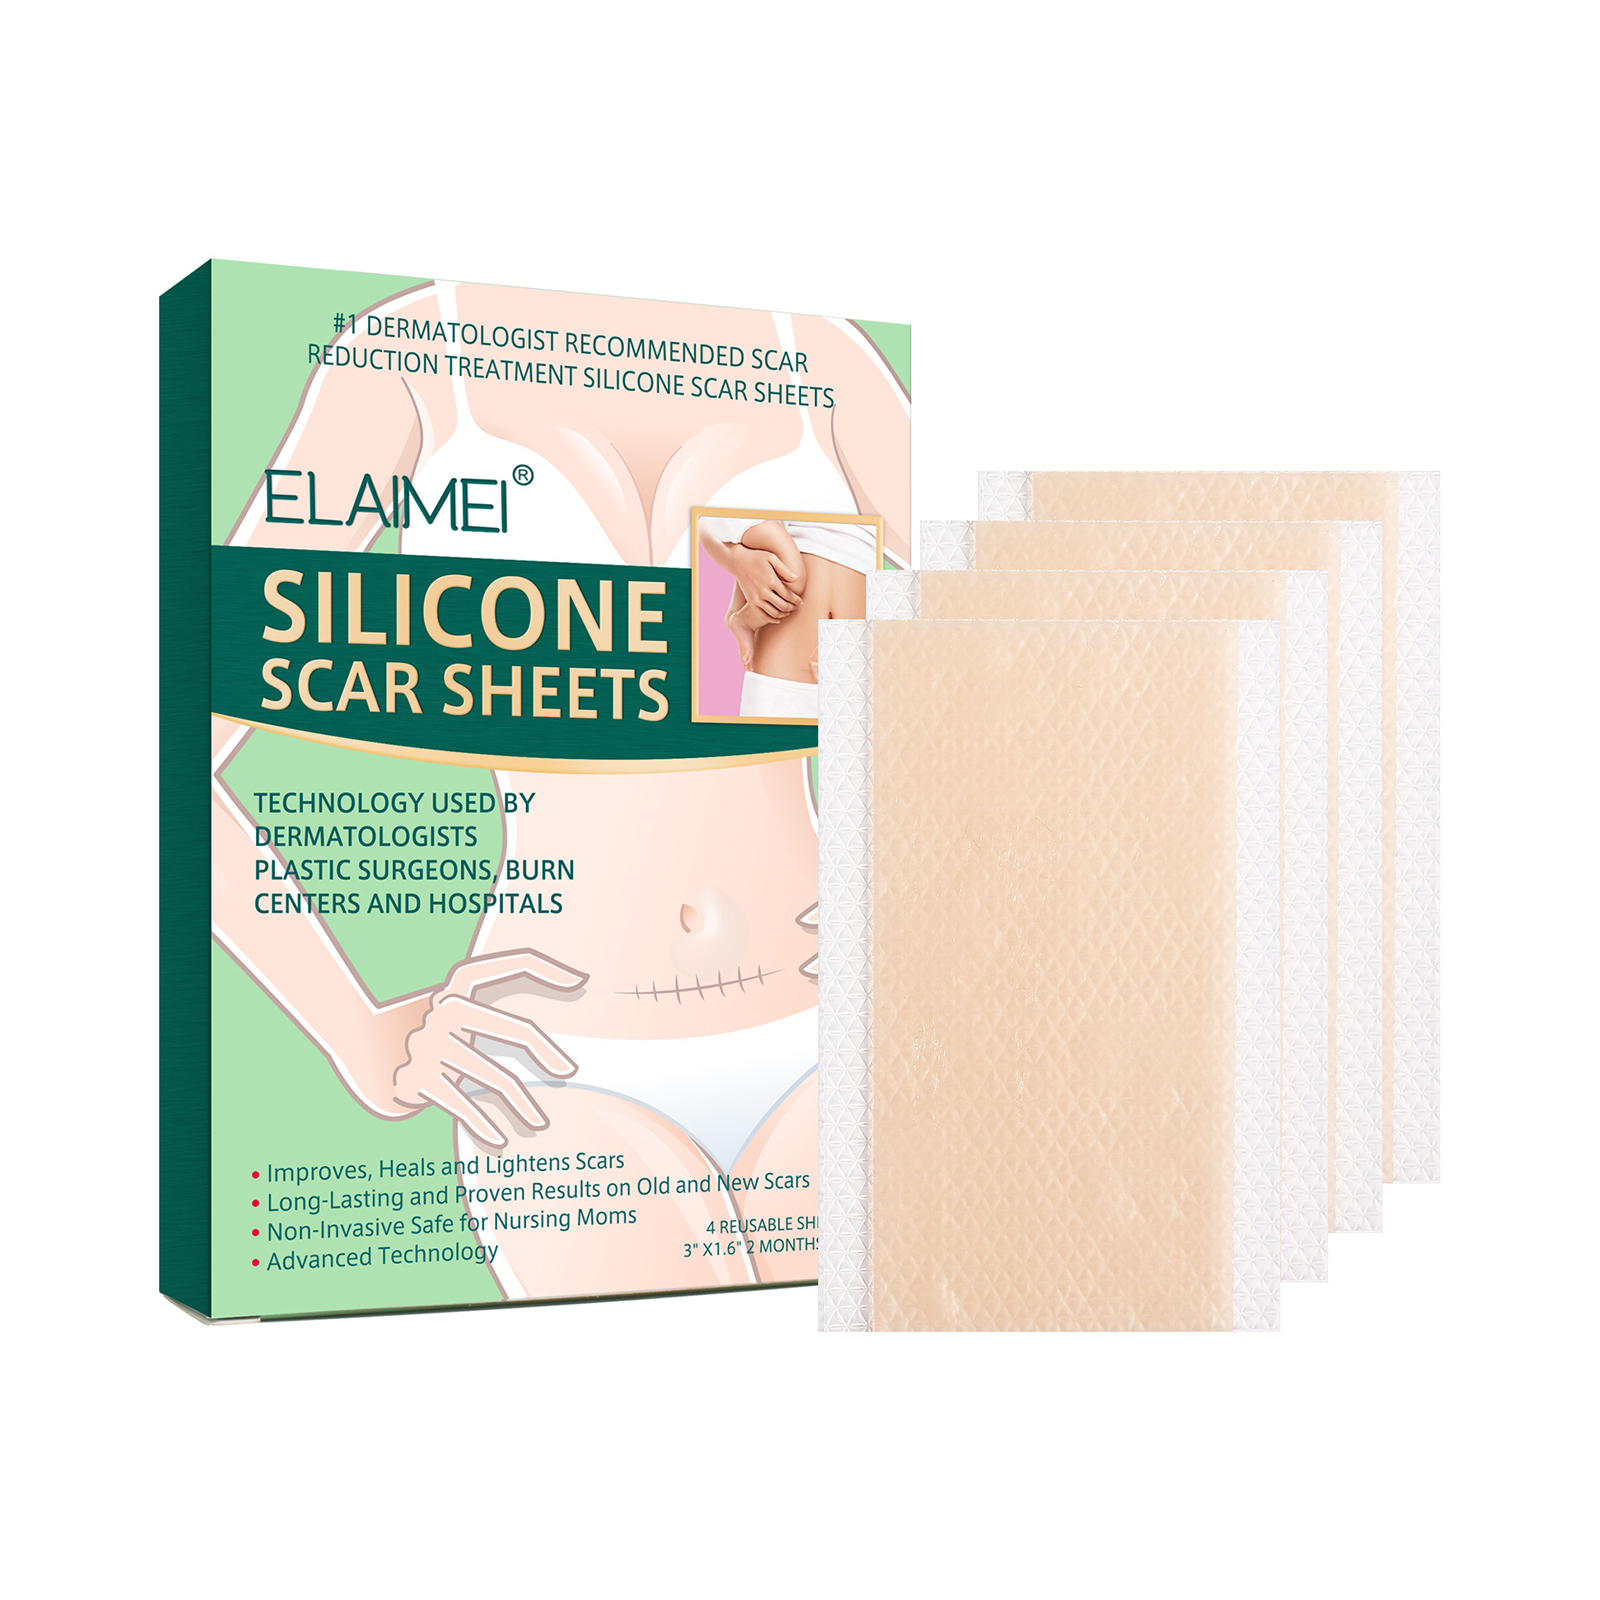 Silicone Scar Sheets Self-adhesive Scar Tape Scar Removal Strips For Acne Scars C-section Keloid Surgery Scars Treatment 4pcs/box